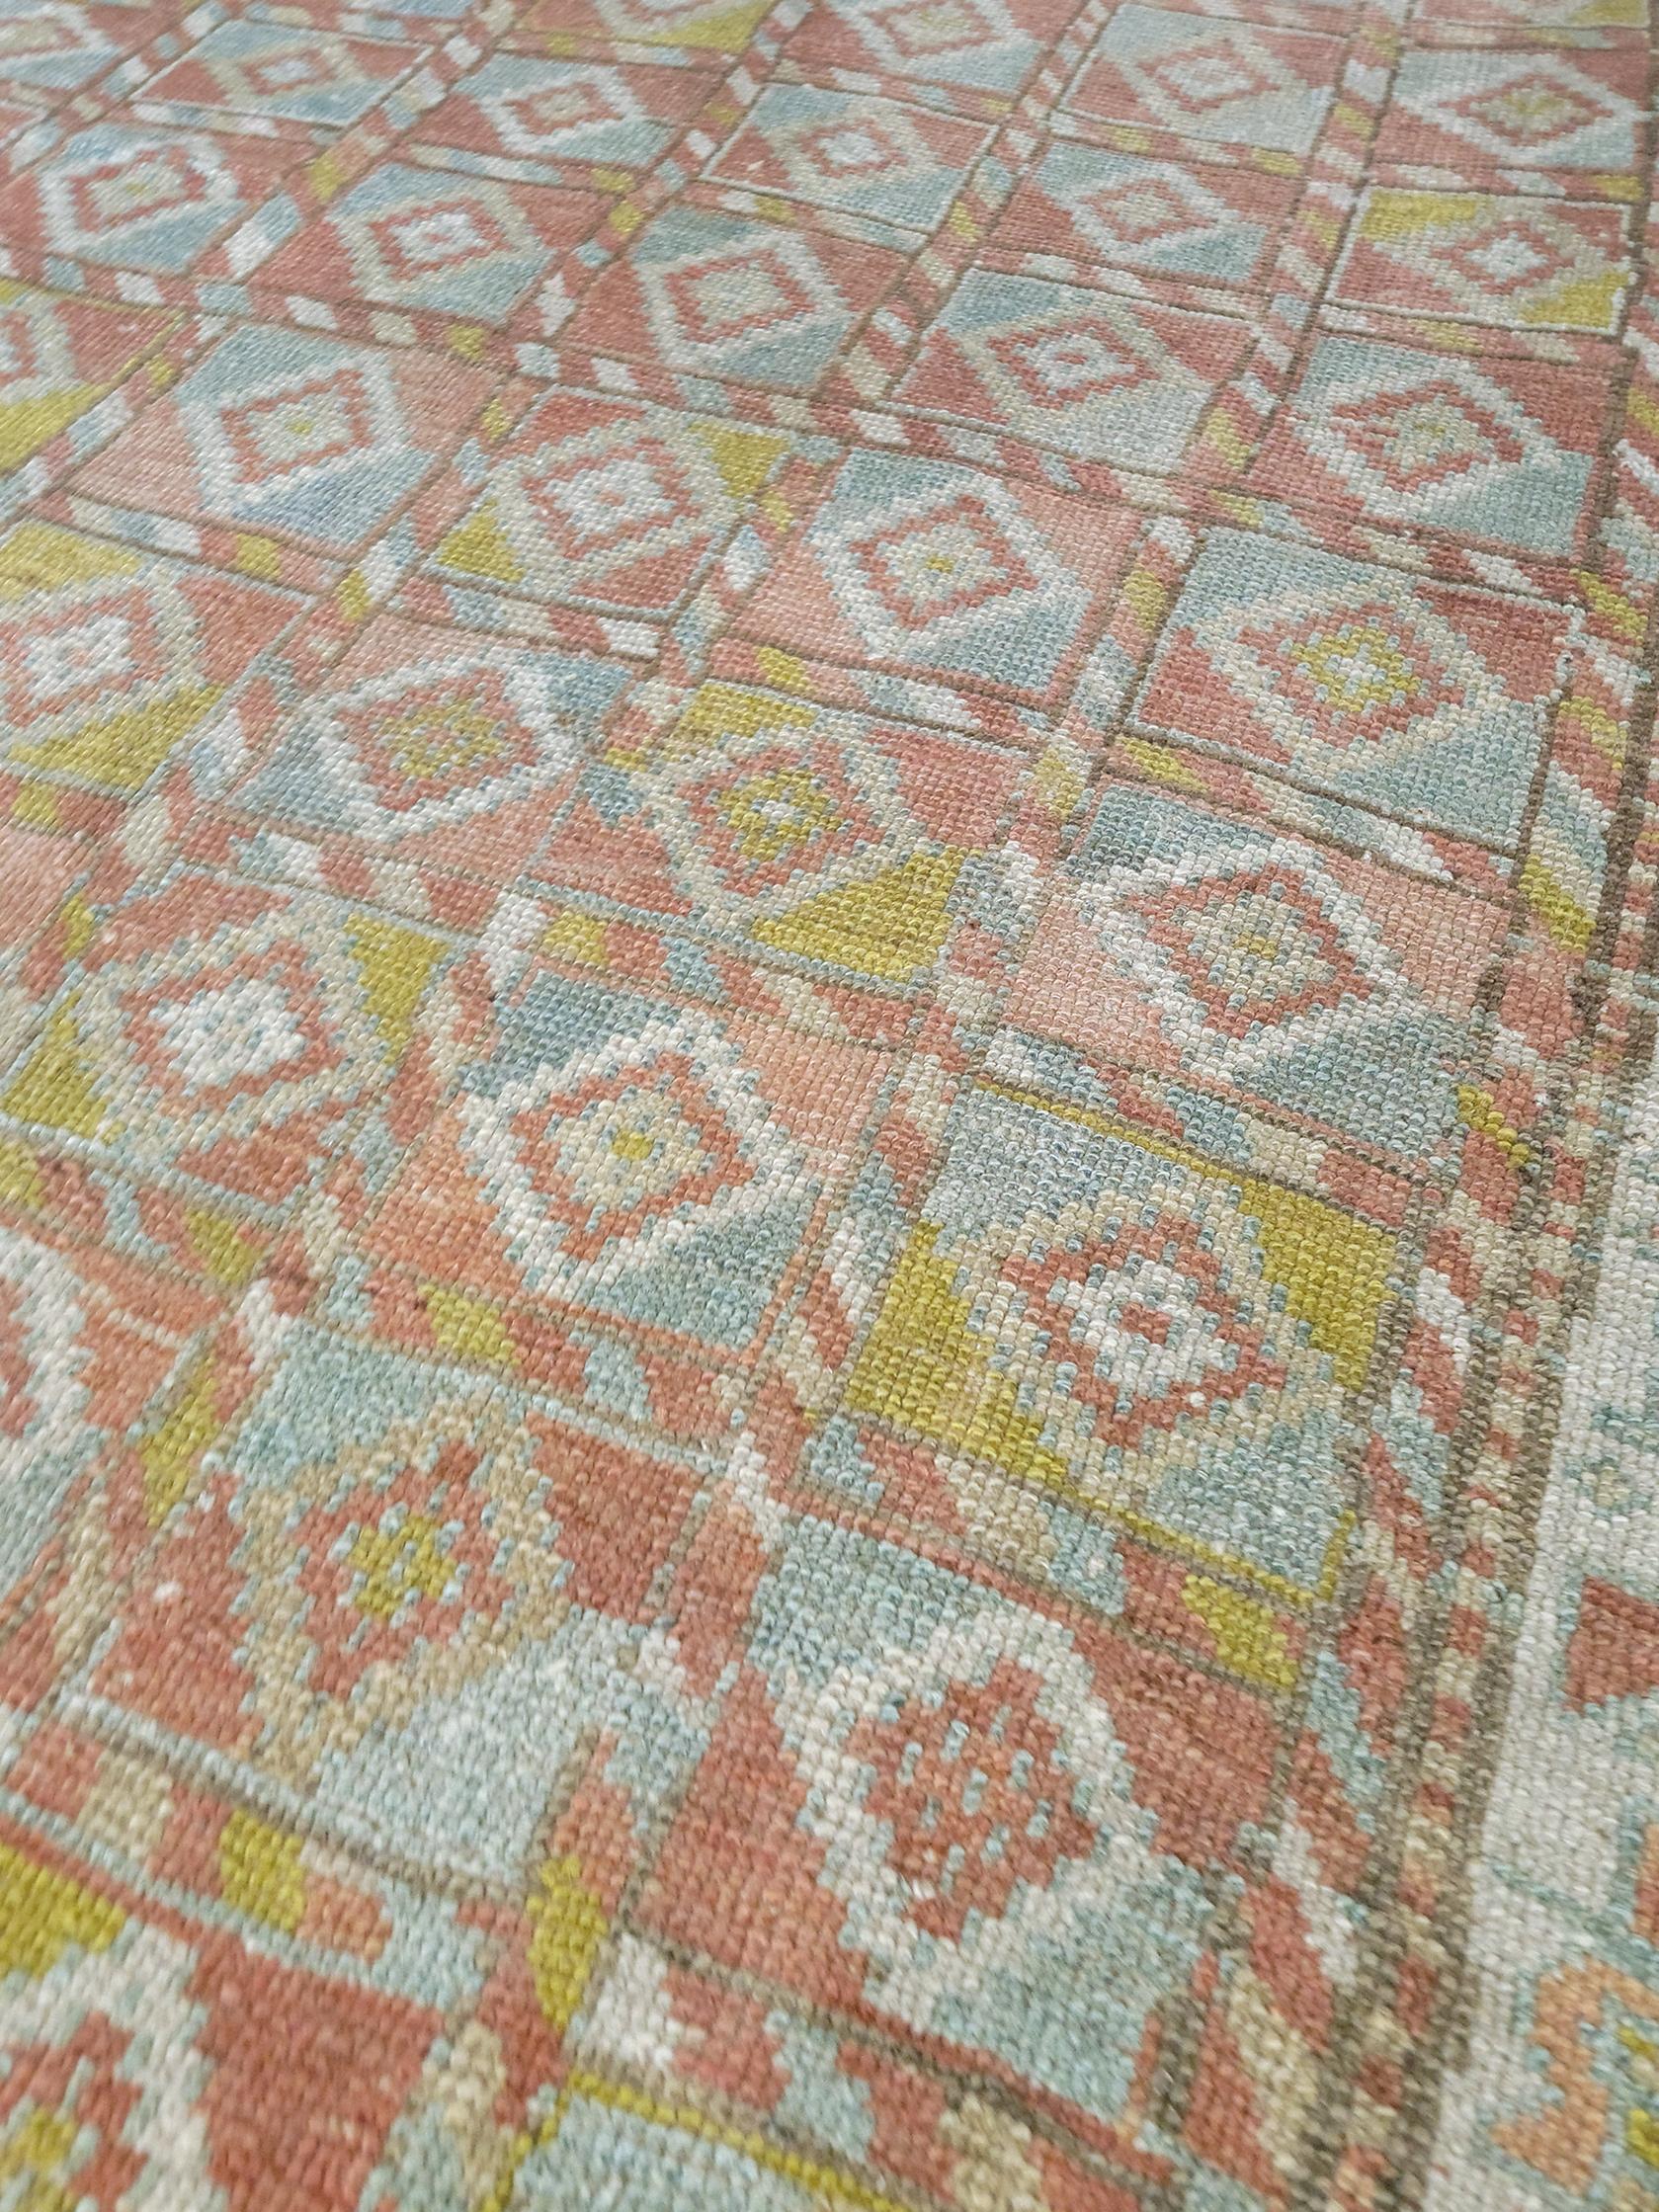 Age: Circa 1940

Colors: pink, blue, yellow

Pile: Low.

Material: Wool.

Wear Notes: 2 

Fun and colorful vintage Kurdish rug with an interesting geometric design. Soft underfoot, good condition with even fading.

Wear Guide:
Vintage